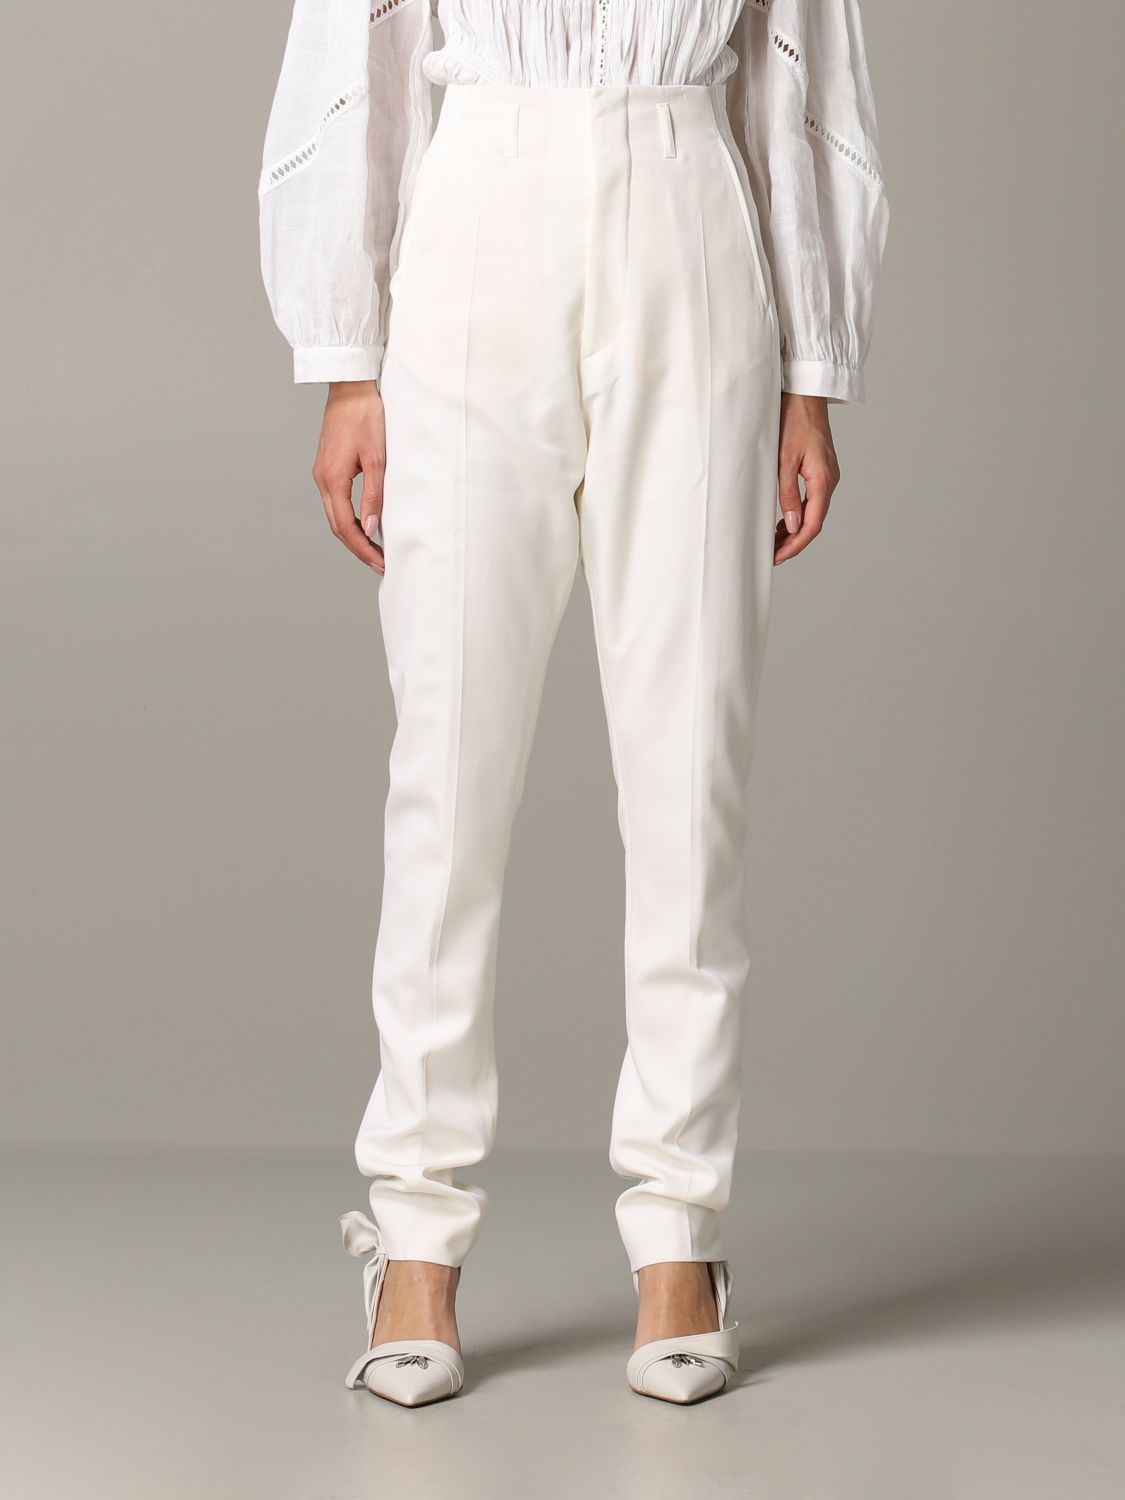 Isabel Marant Outlet: pants for woman - White | Isabel Marant pants PA152620P105I on